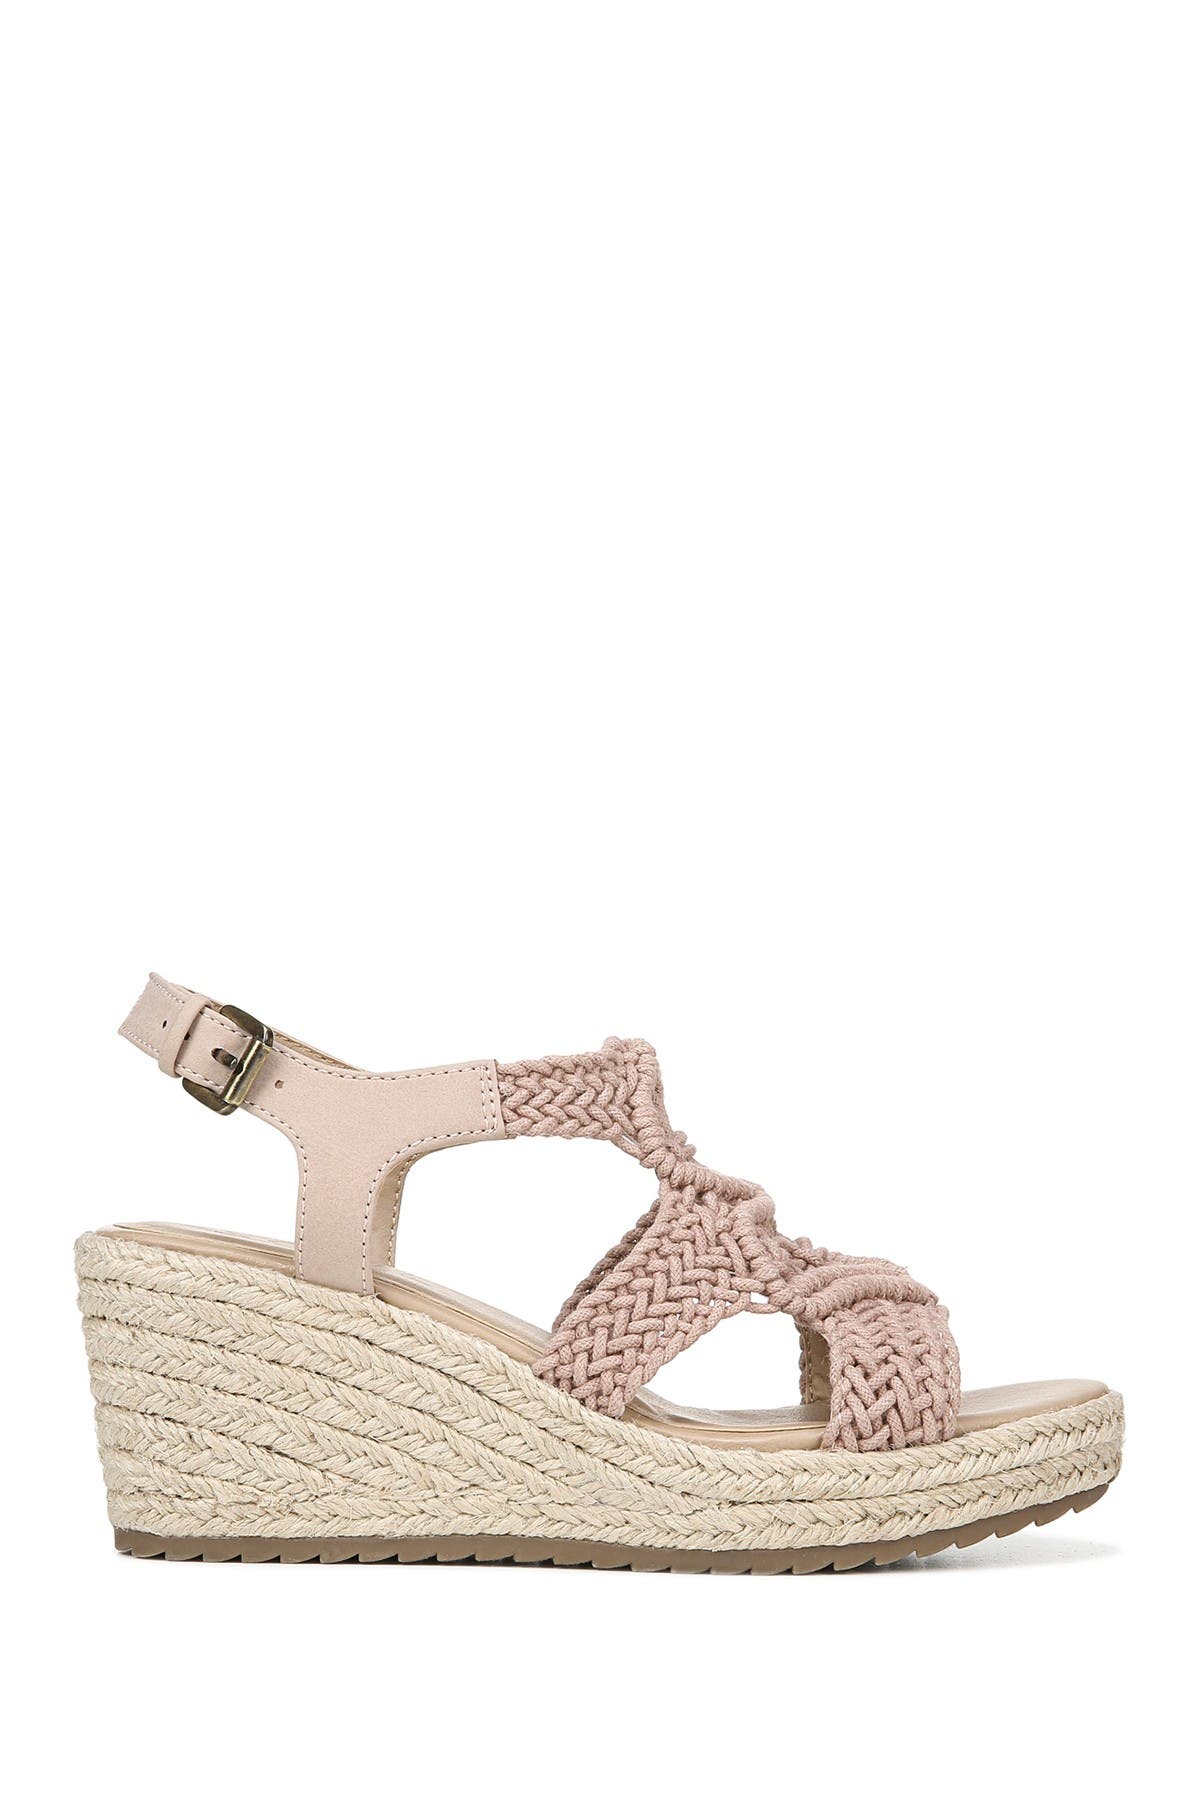 soul naturalizer oasis women's wedge sandals